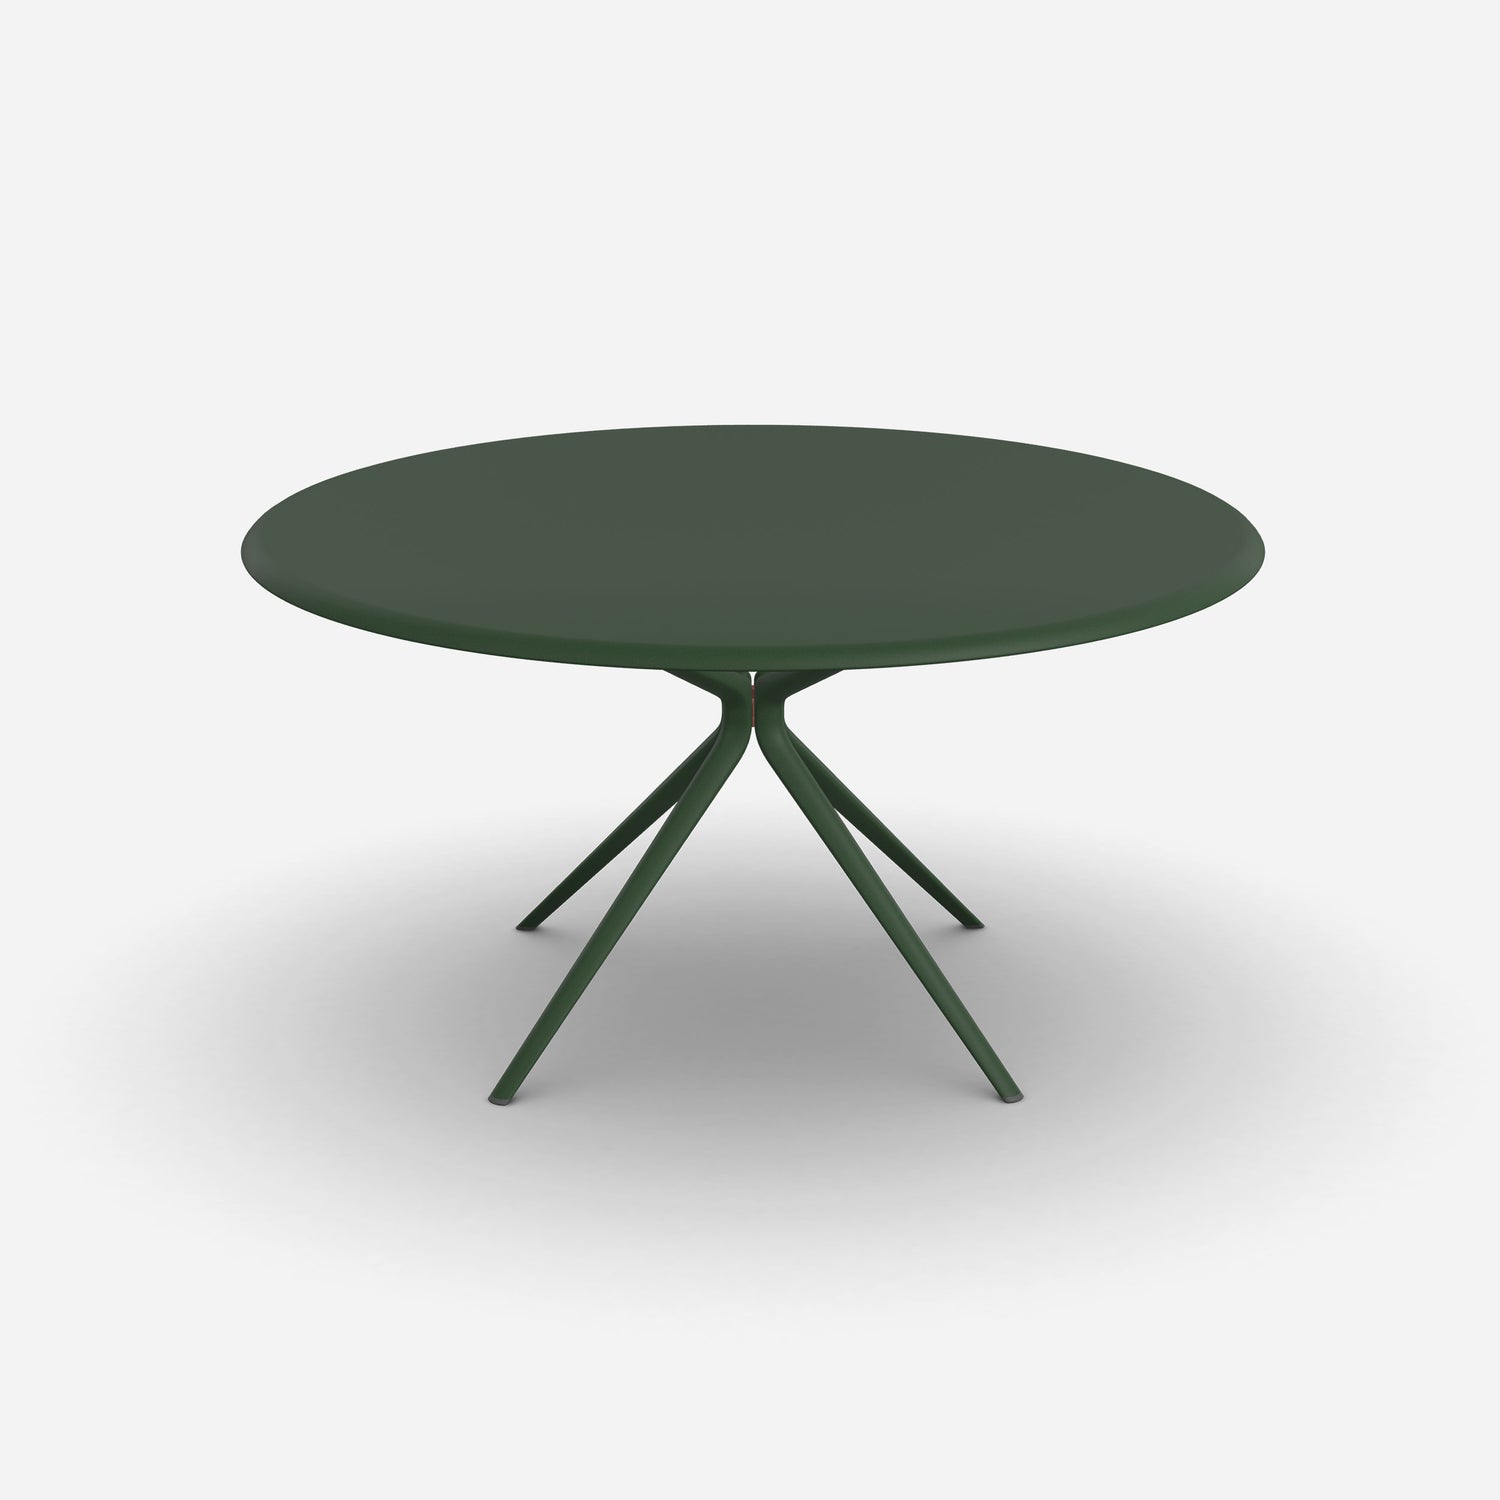 product-color-Verde Bosco, Forest Green